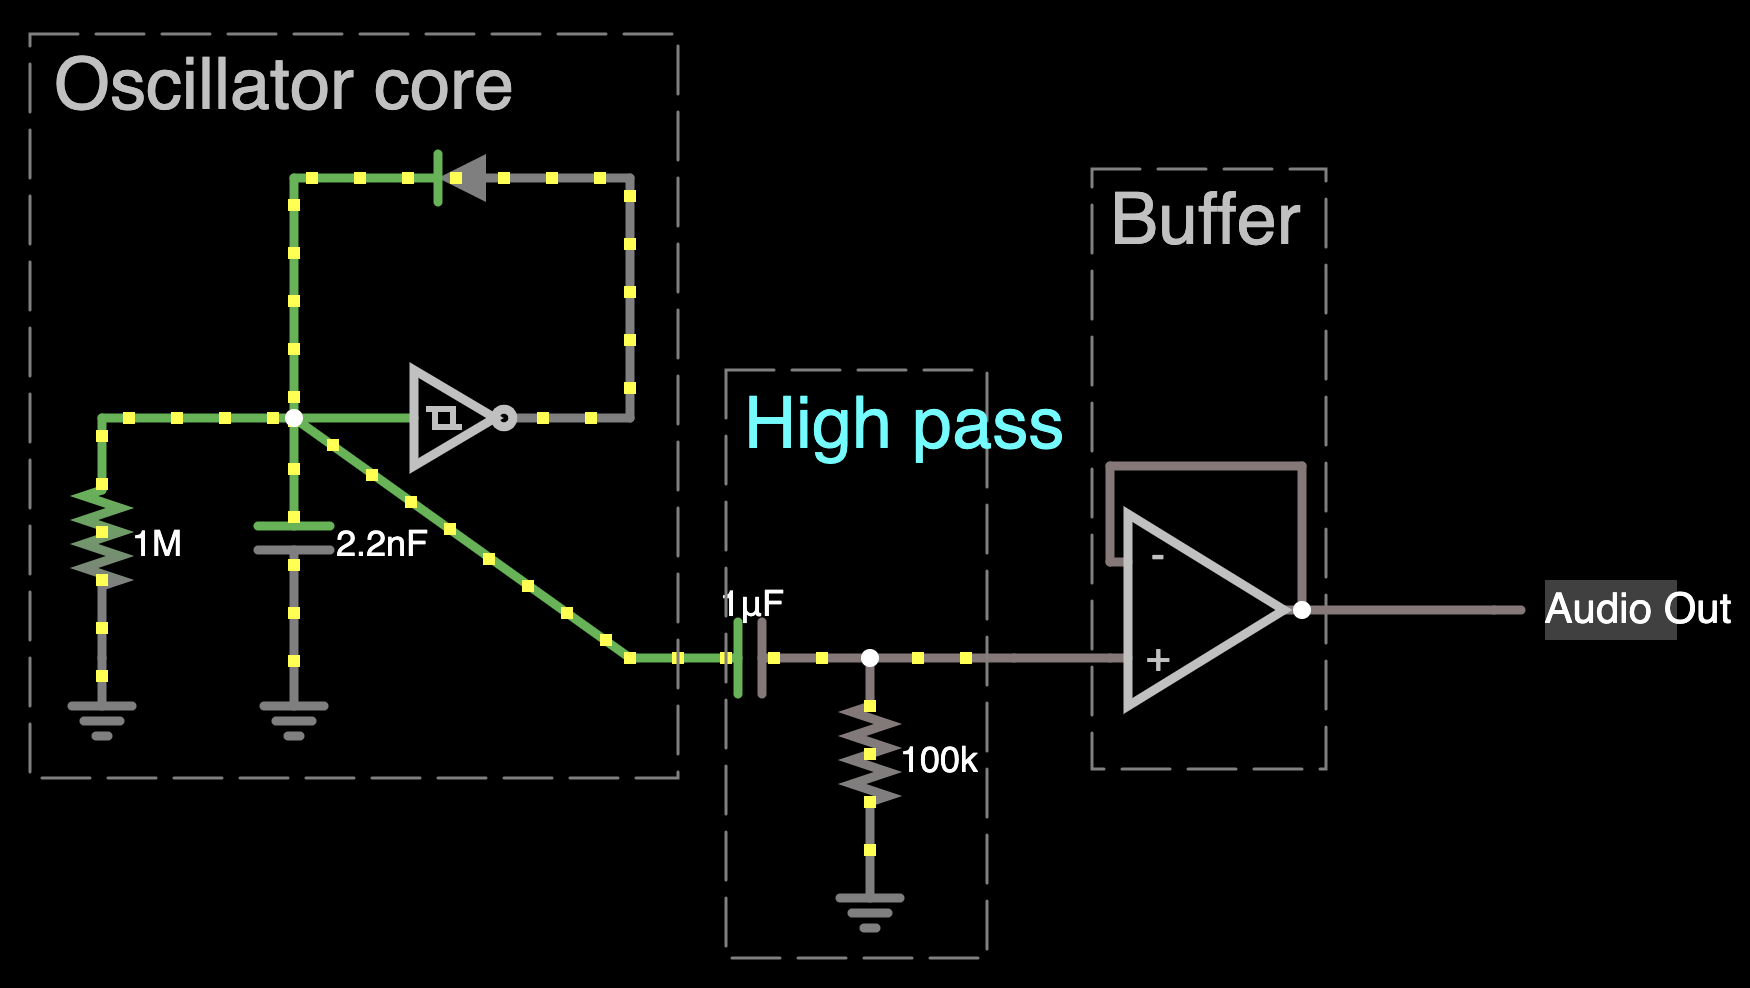 VCO with DC high pass filter before the buffer, which does not work.